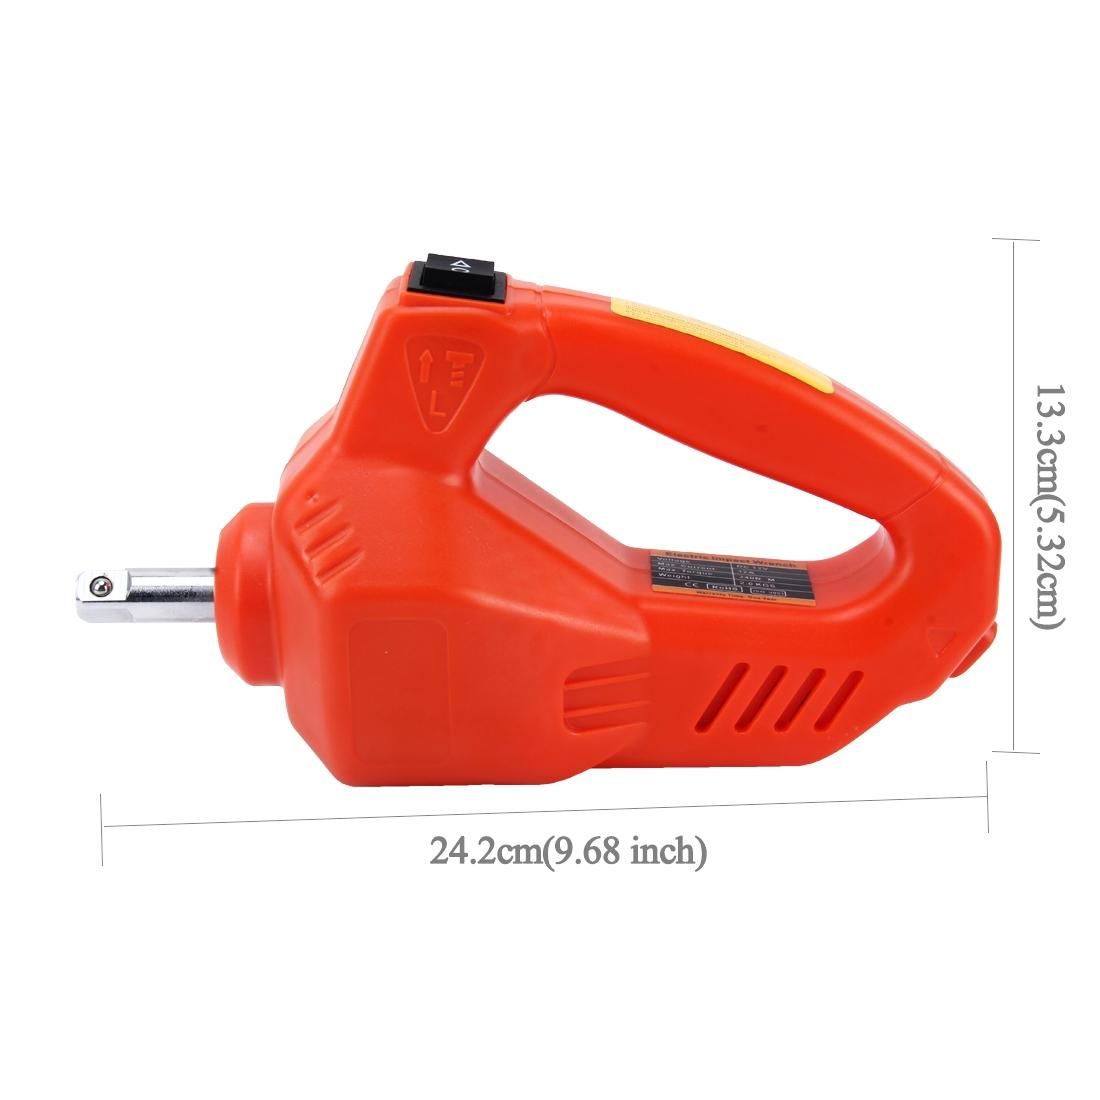 Car Auto 100W 340N*M Electric Impact Wrench with Two Fuse Tubes Two Sockets for 17-19mm and 21-23mm (Orange)